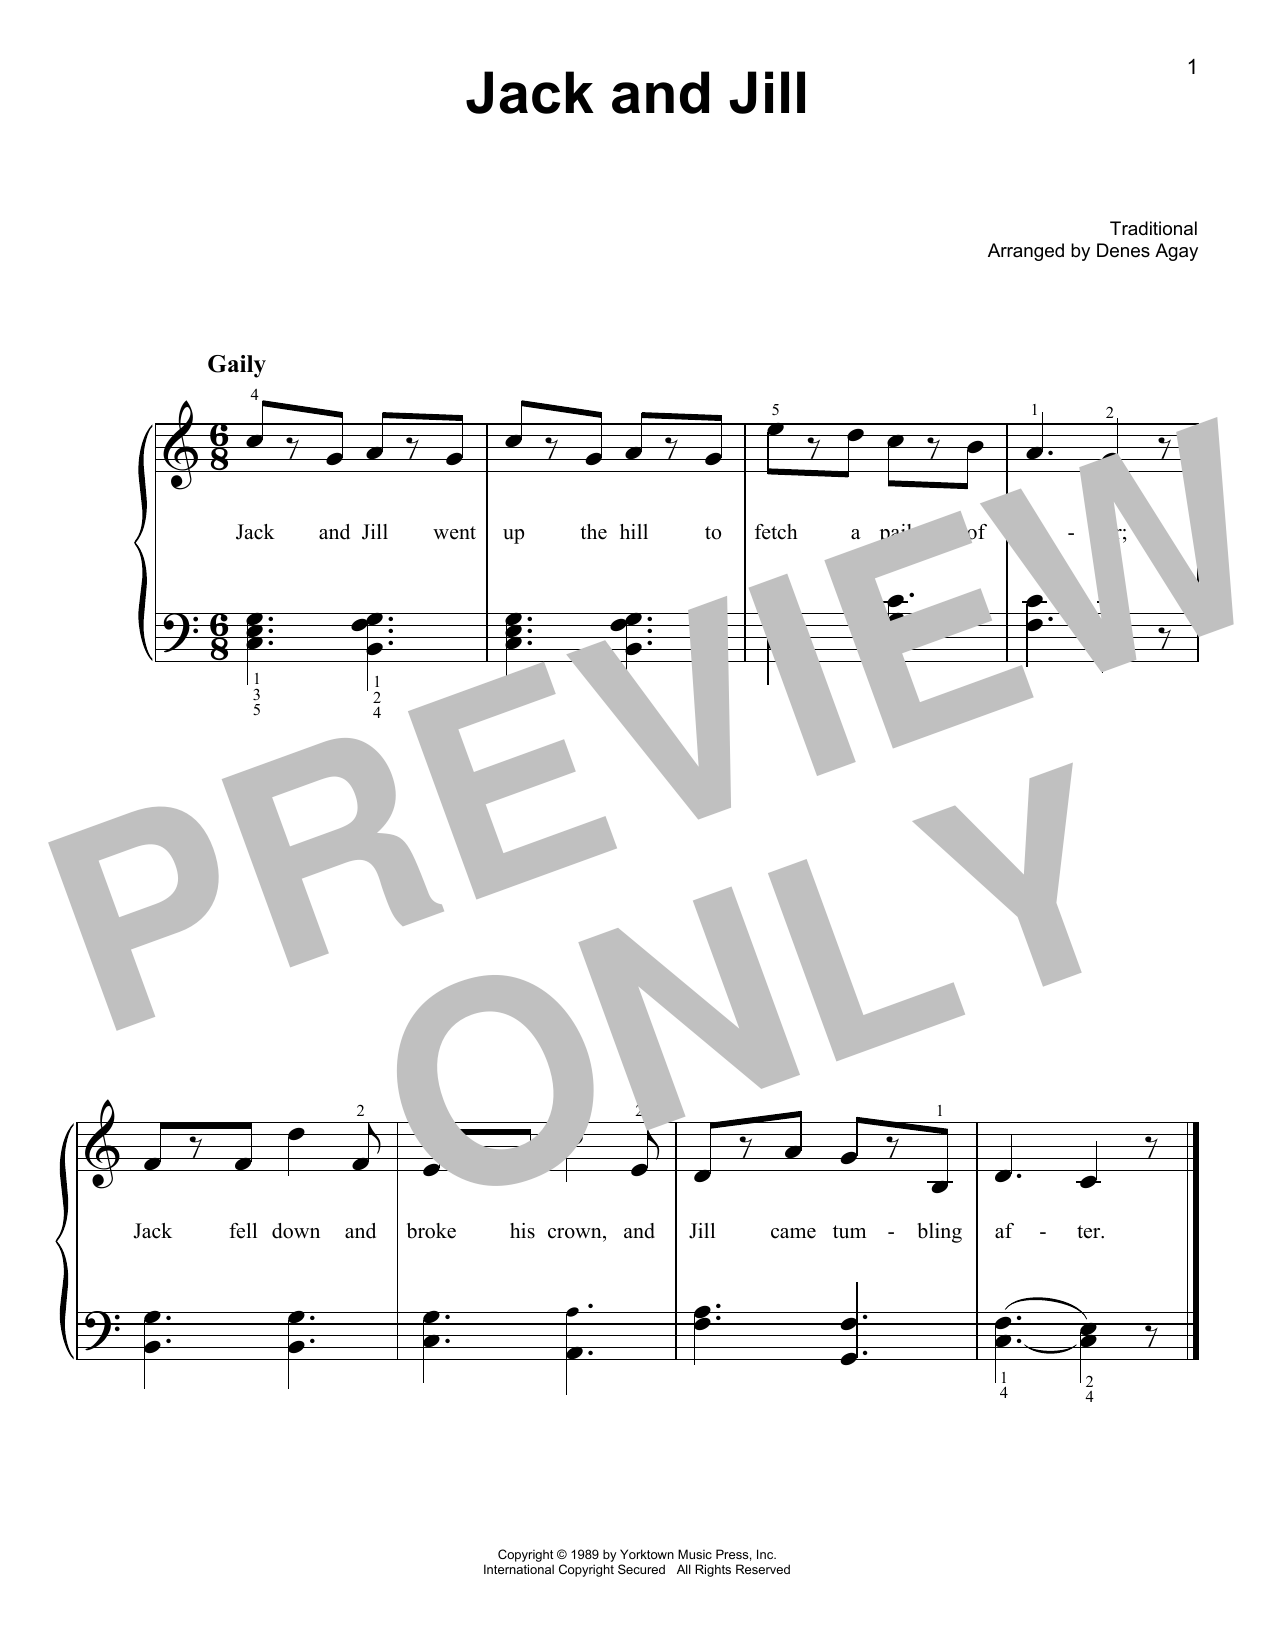 Download Traditional Jack And Jill (arr. Denes Agay) Sheet Music